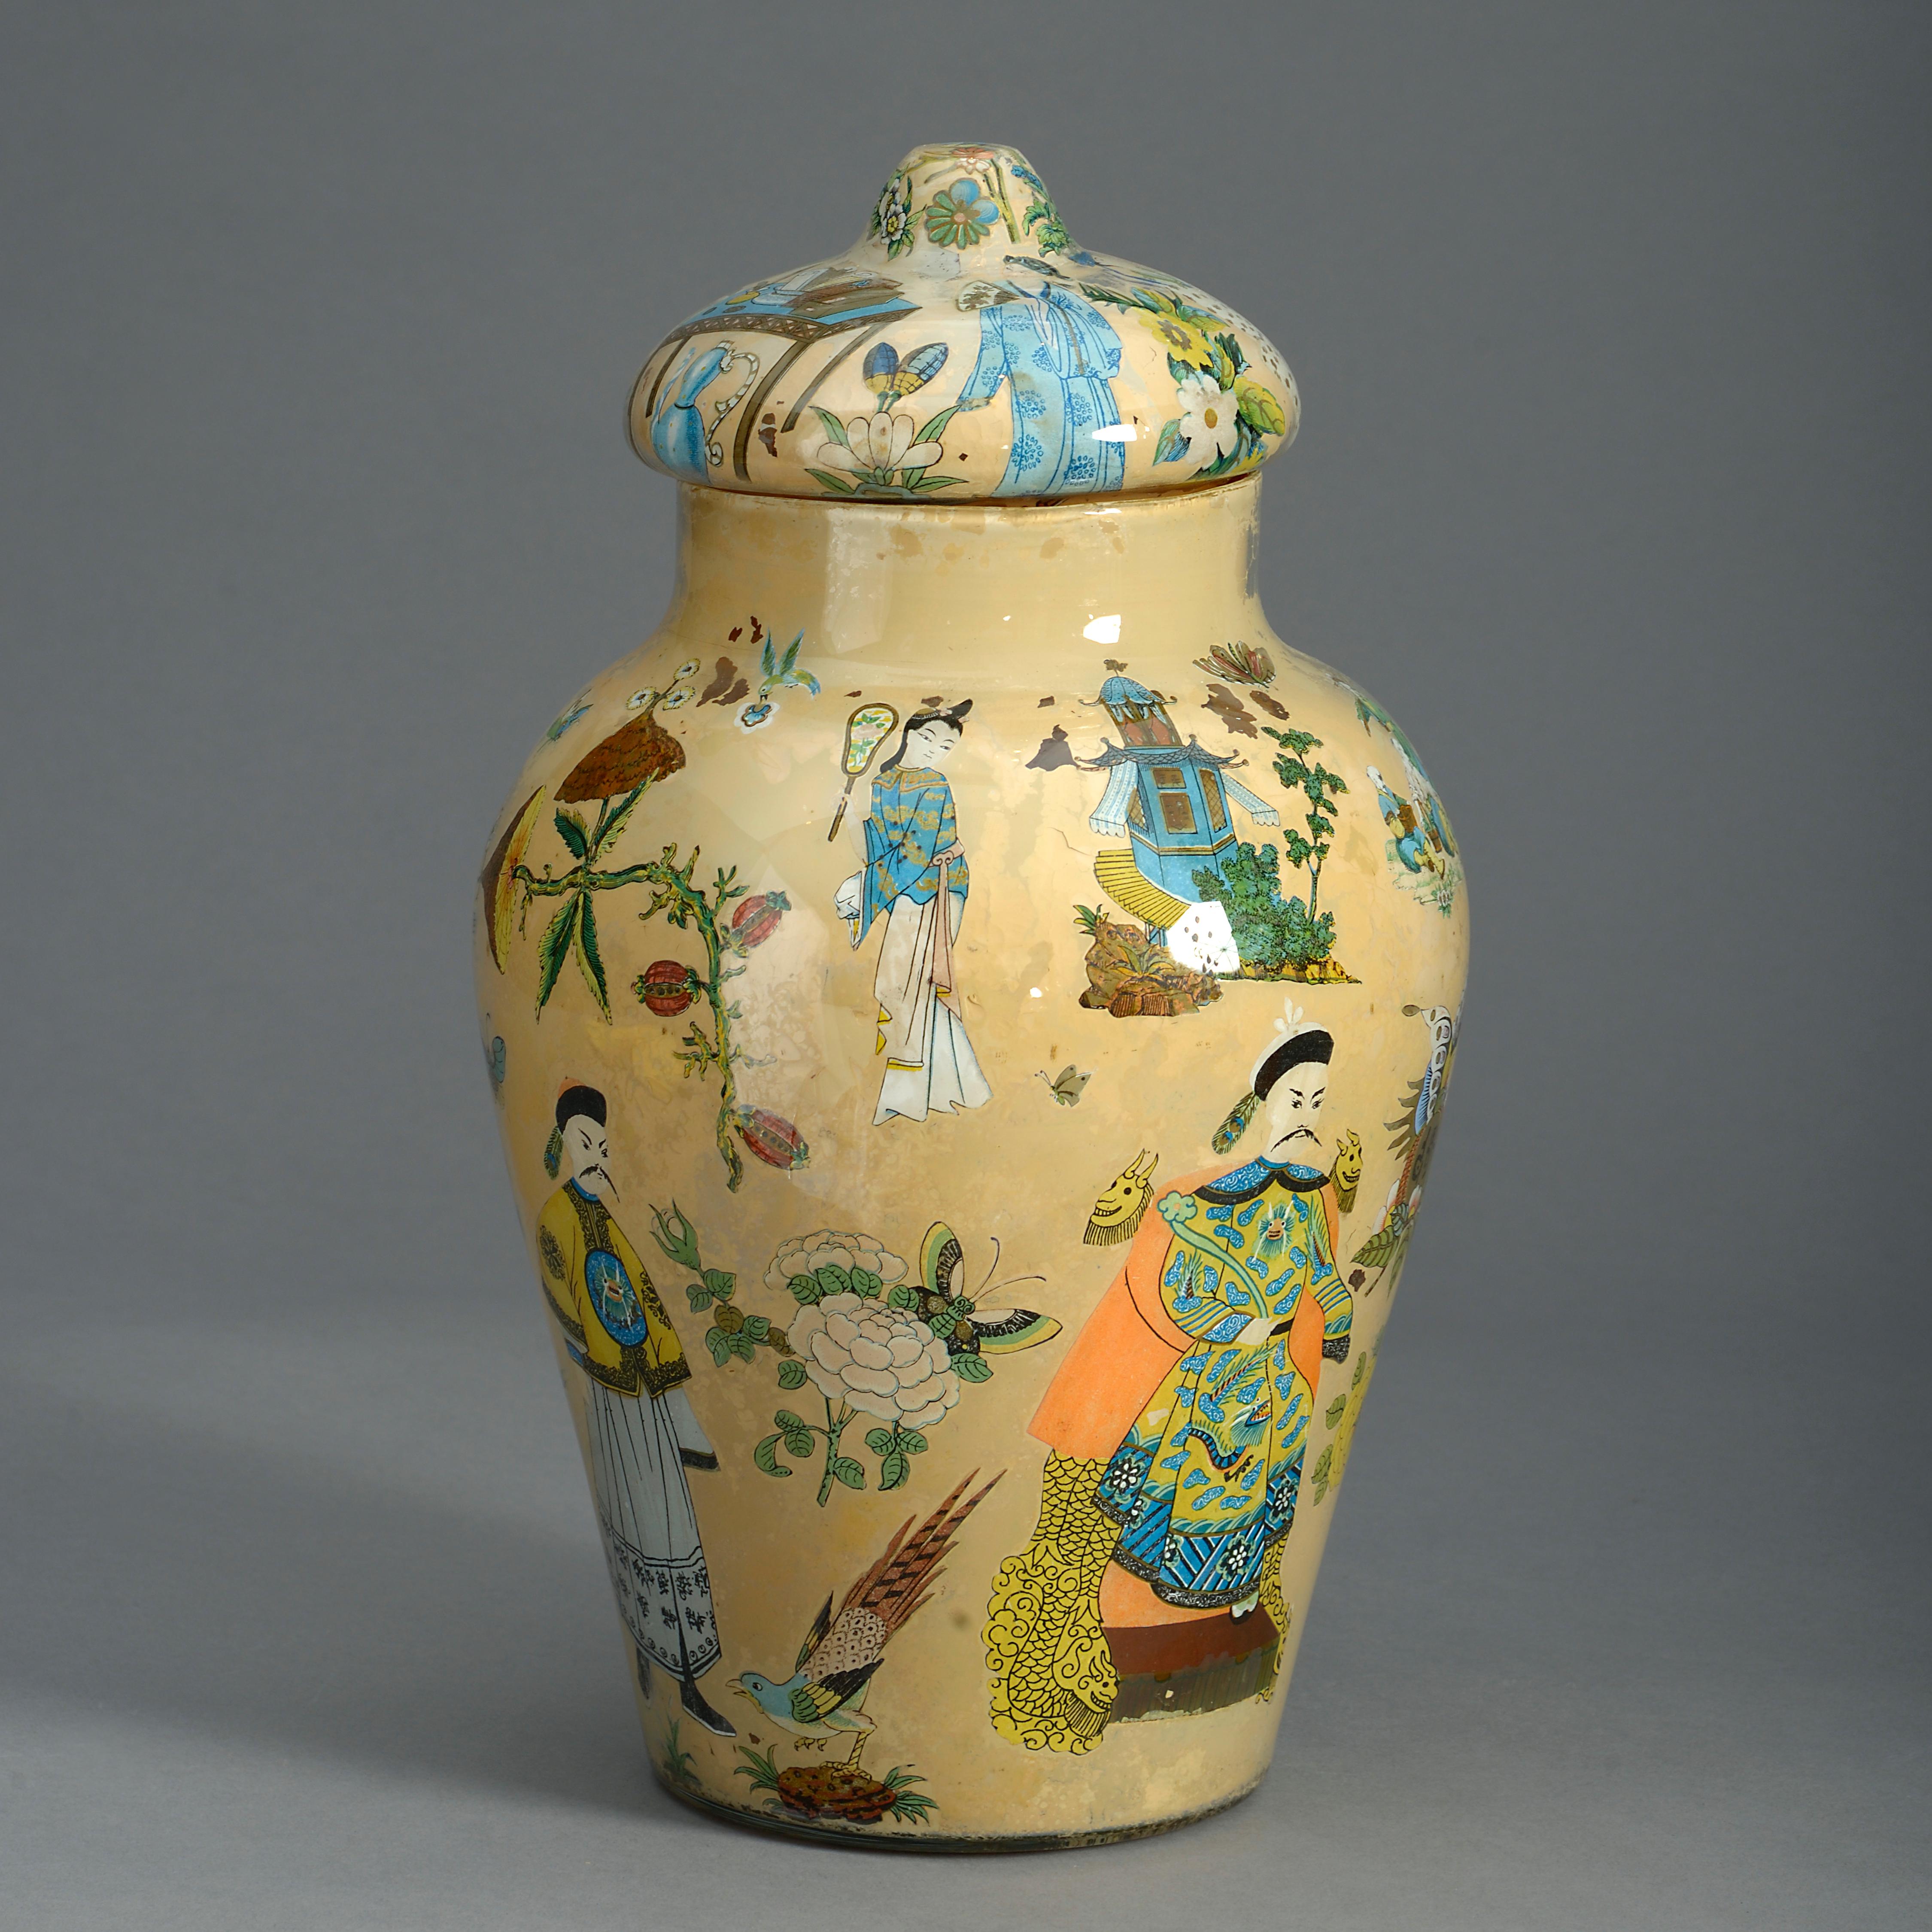 A charming mid-nineteenth century Decalcomania vase and cover, the body decorated throughout with polychrome chinoiseries upon a tobacco yellow ground.